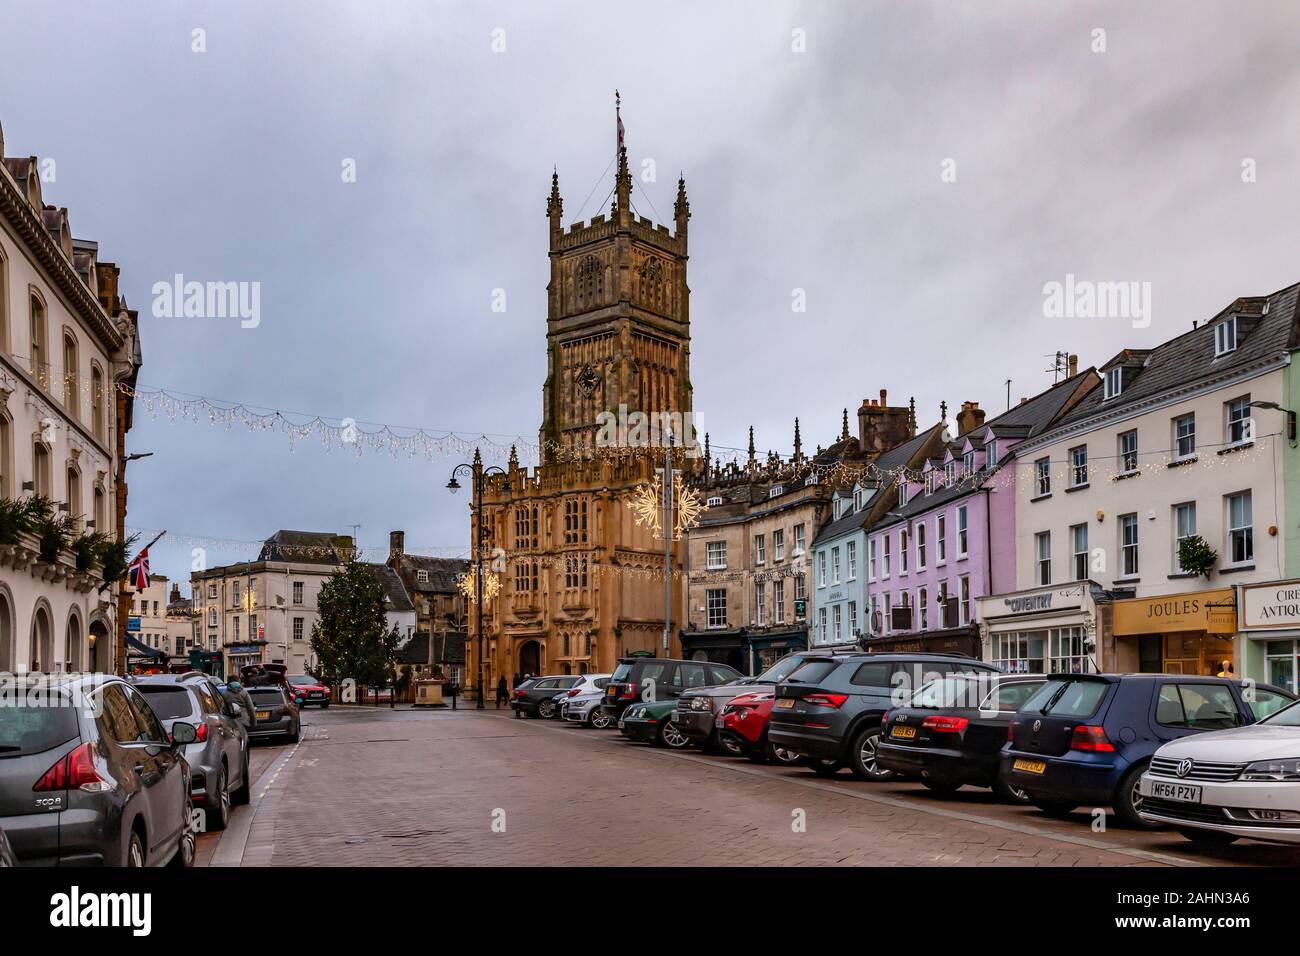 View of St John Baptist form the streets, Cirencester, Gloucestershire, England, UK. Stock Photo